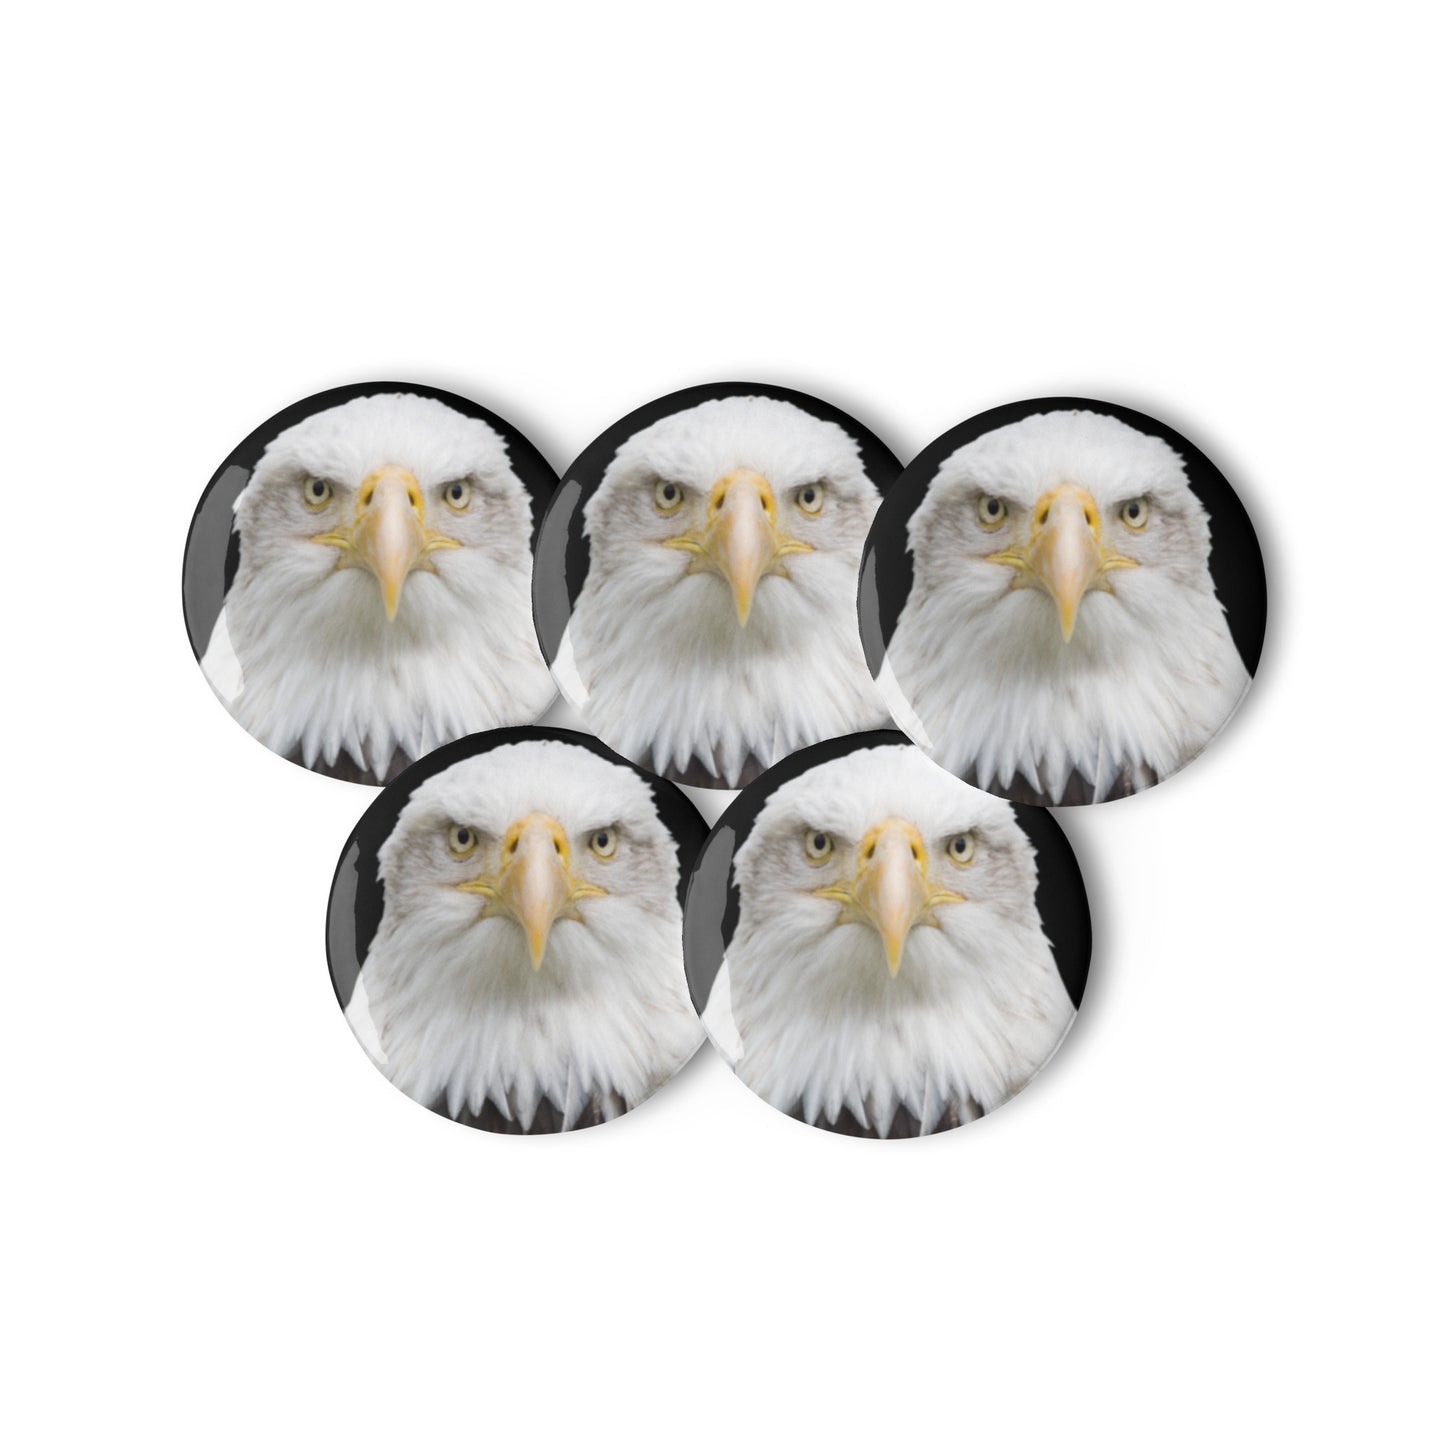 Eagle Pin Buttons 5pk